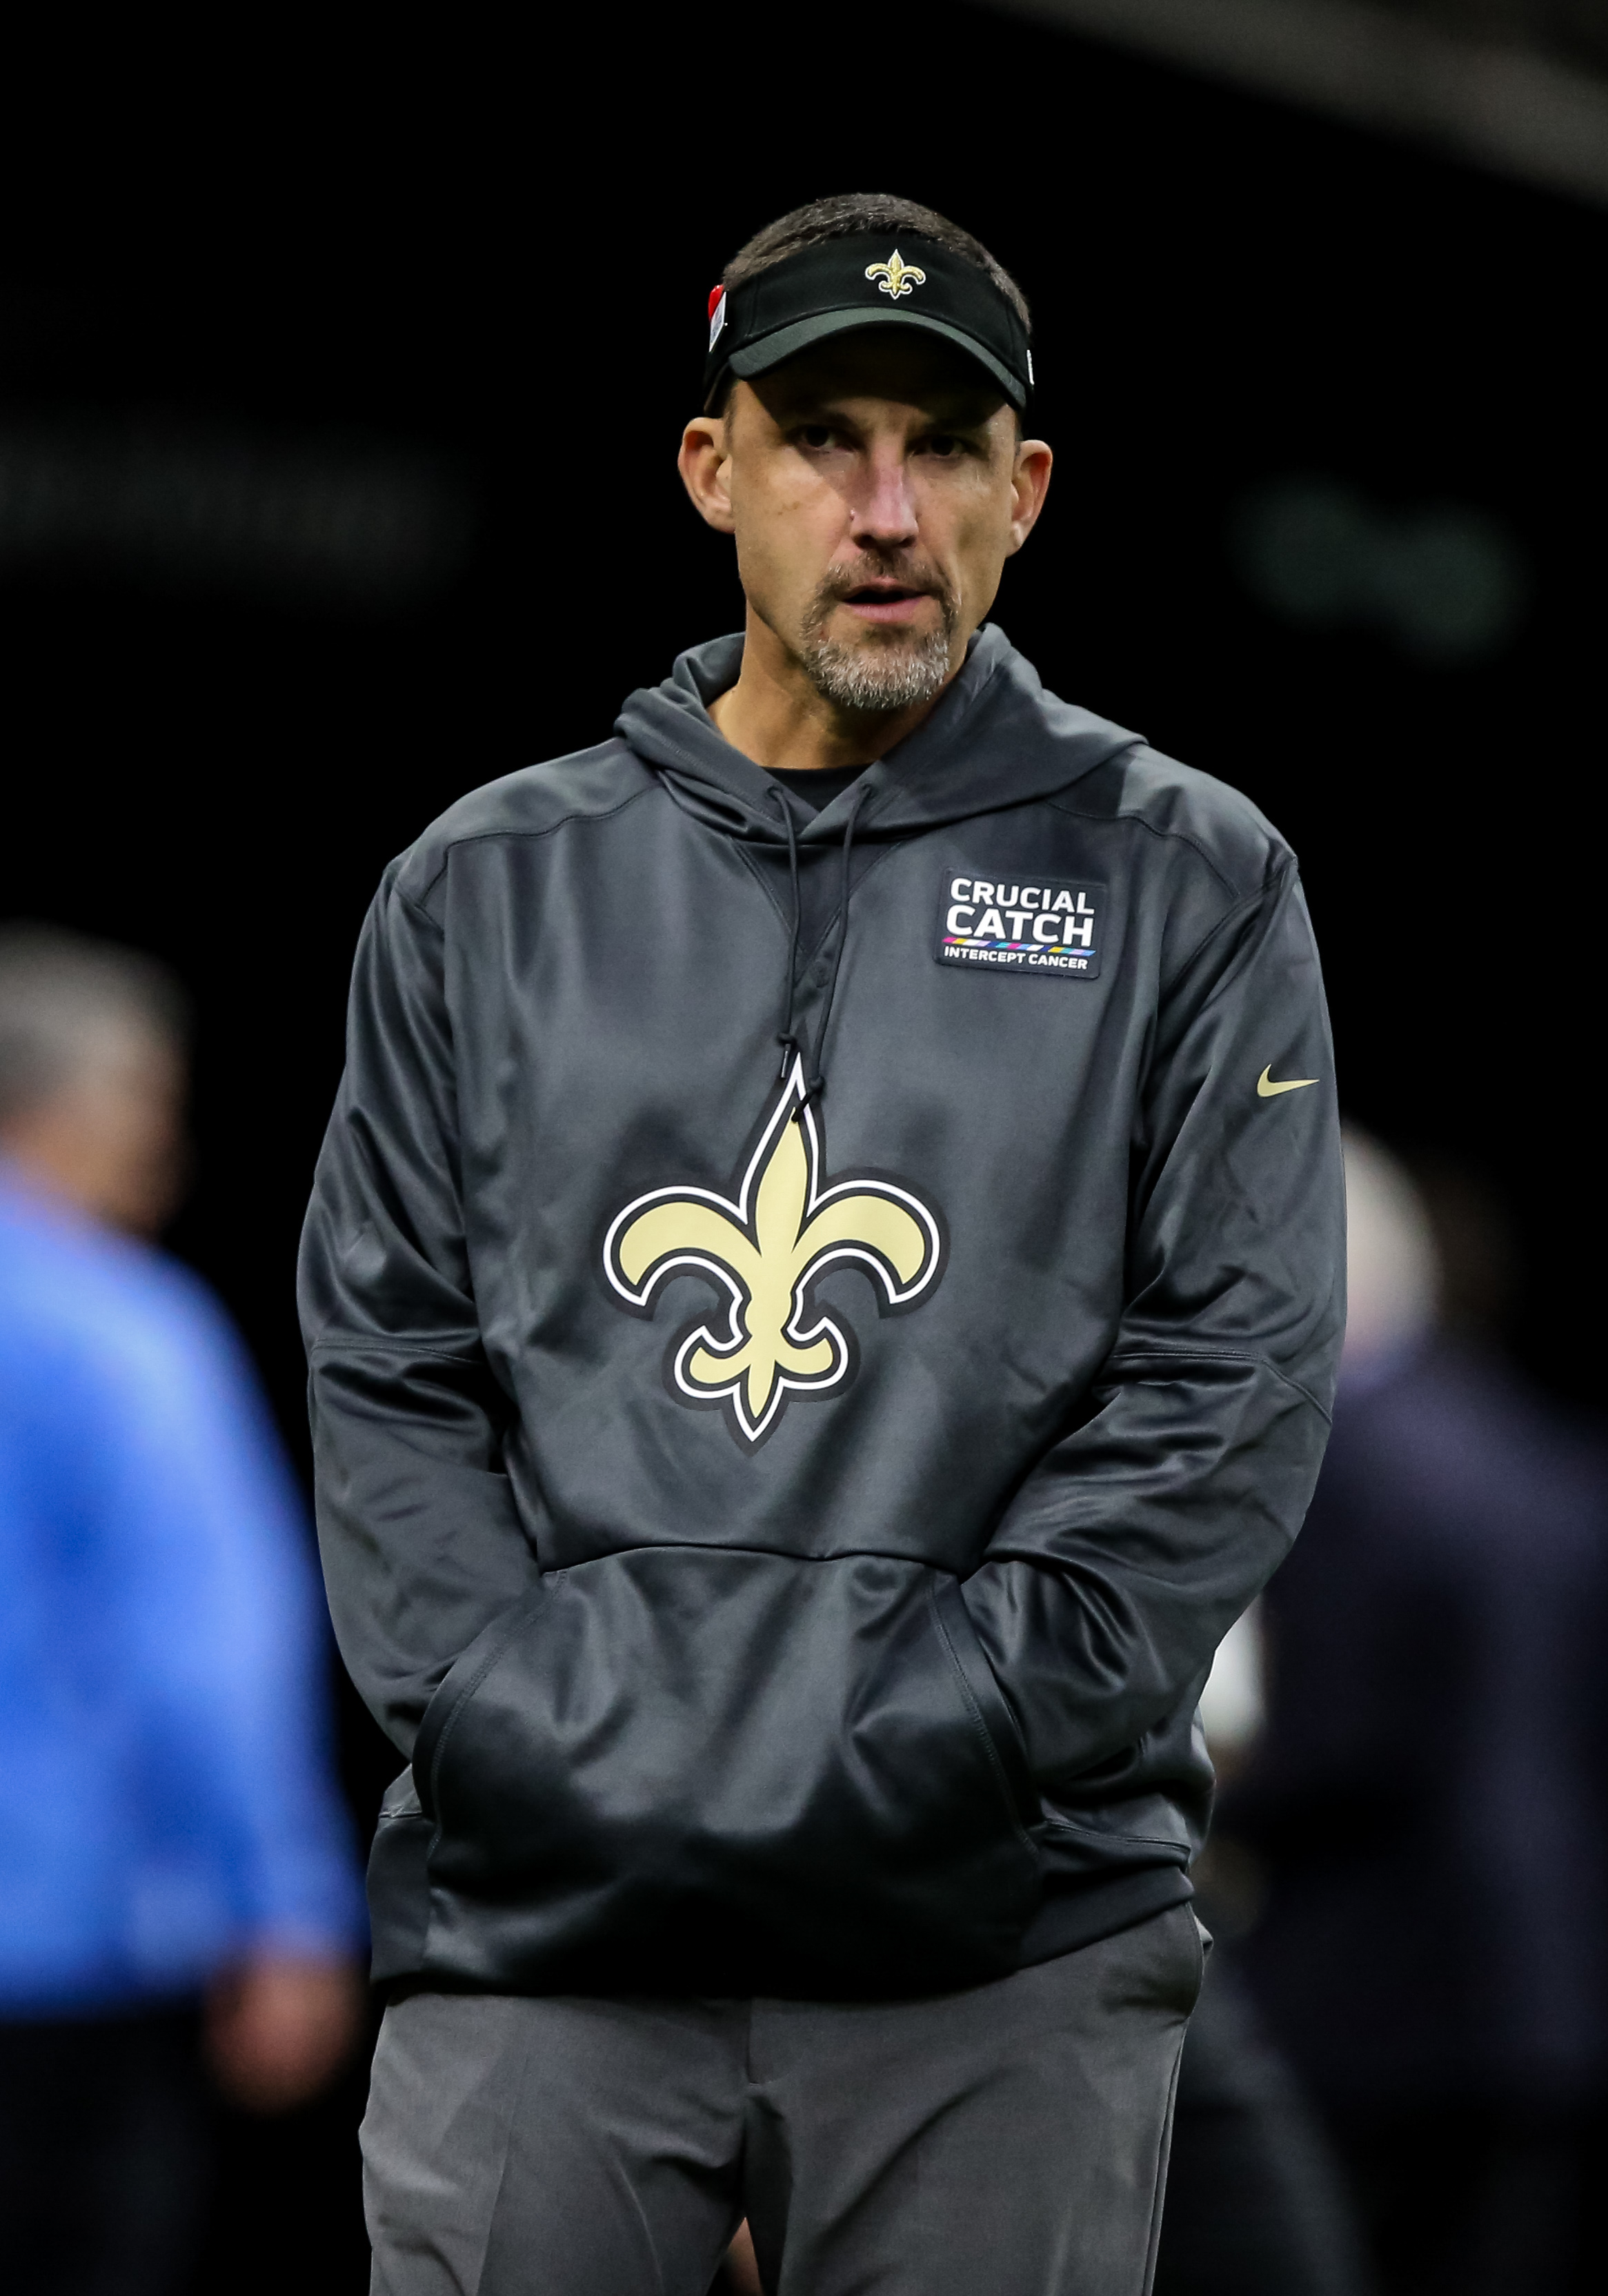 4 New Orleans Saints who could get picked in NFL’s head coach search